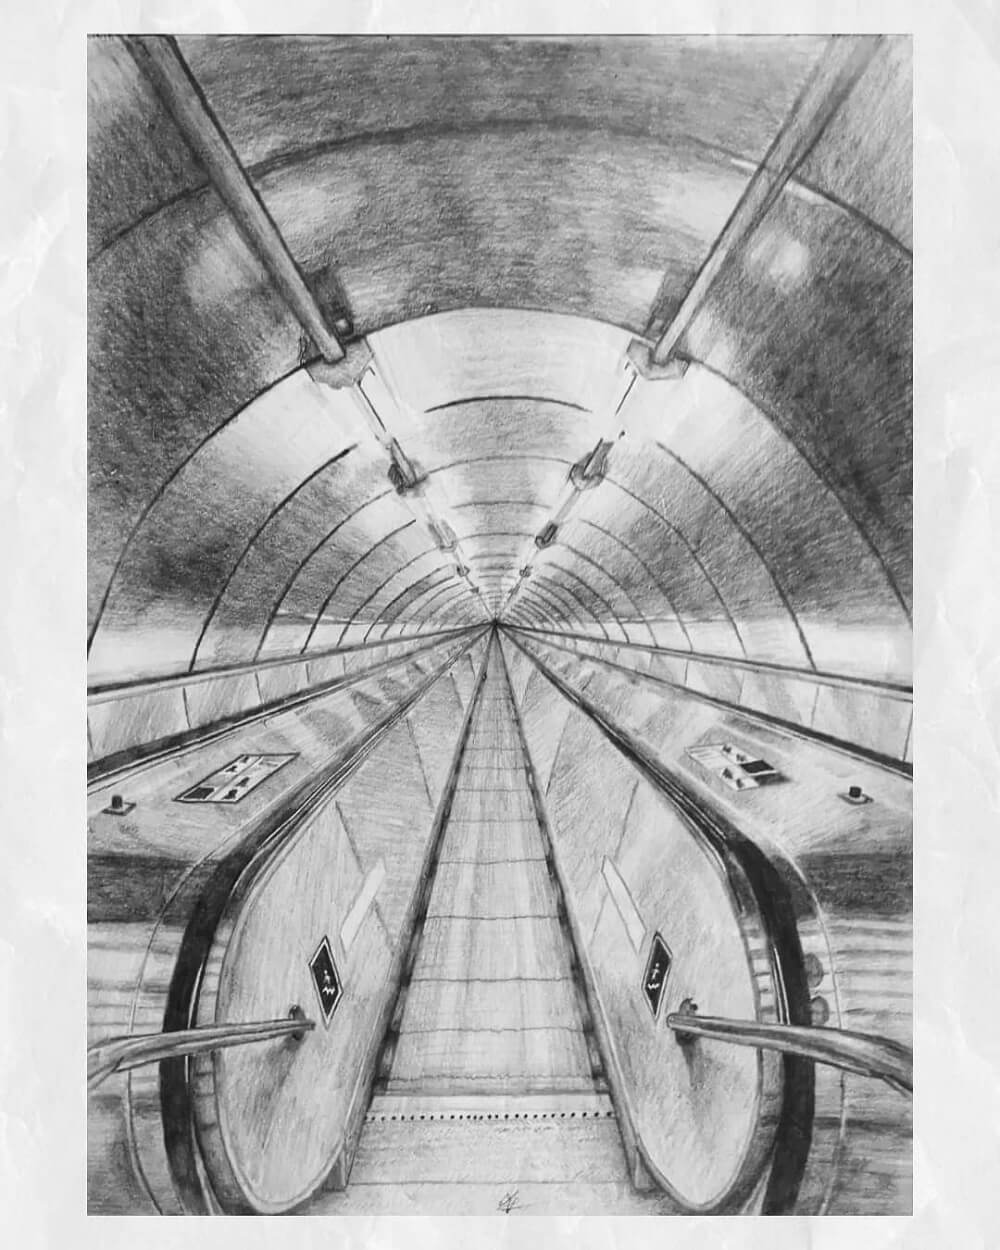 Perspective drawing on Pinterest